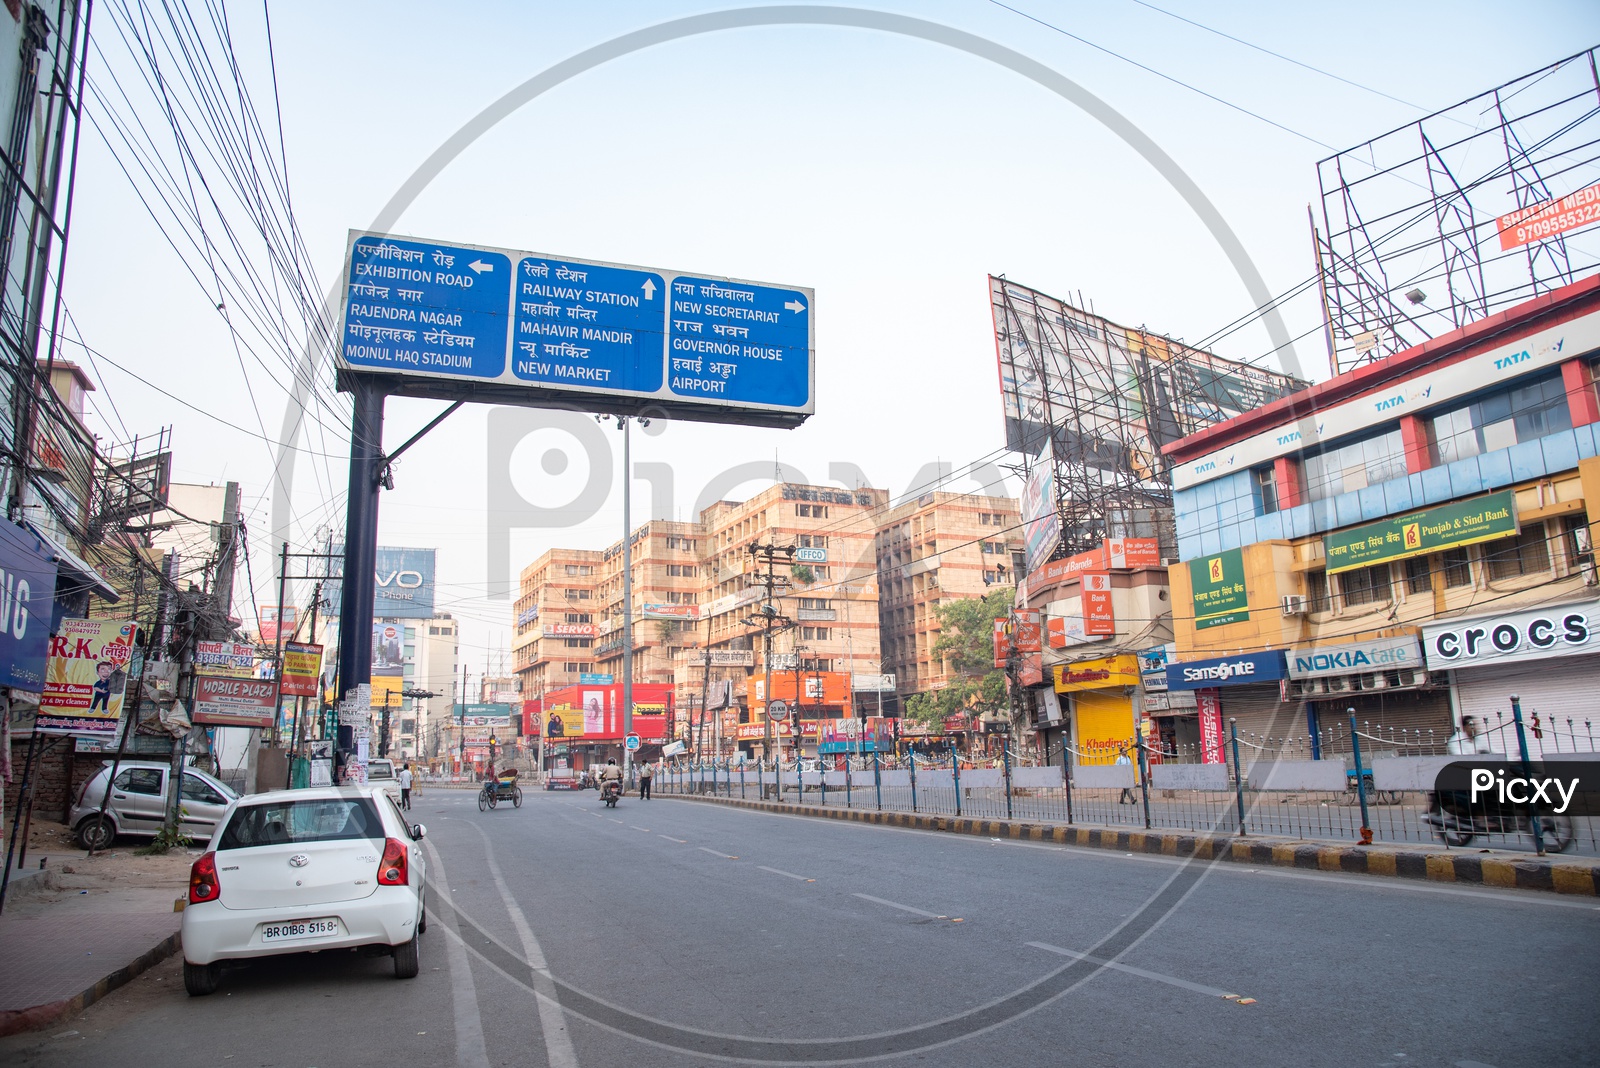 Sign Boards With Directions in the Patna City Roads